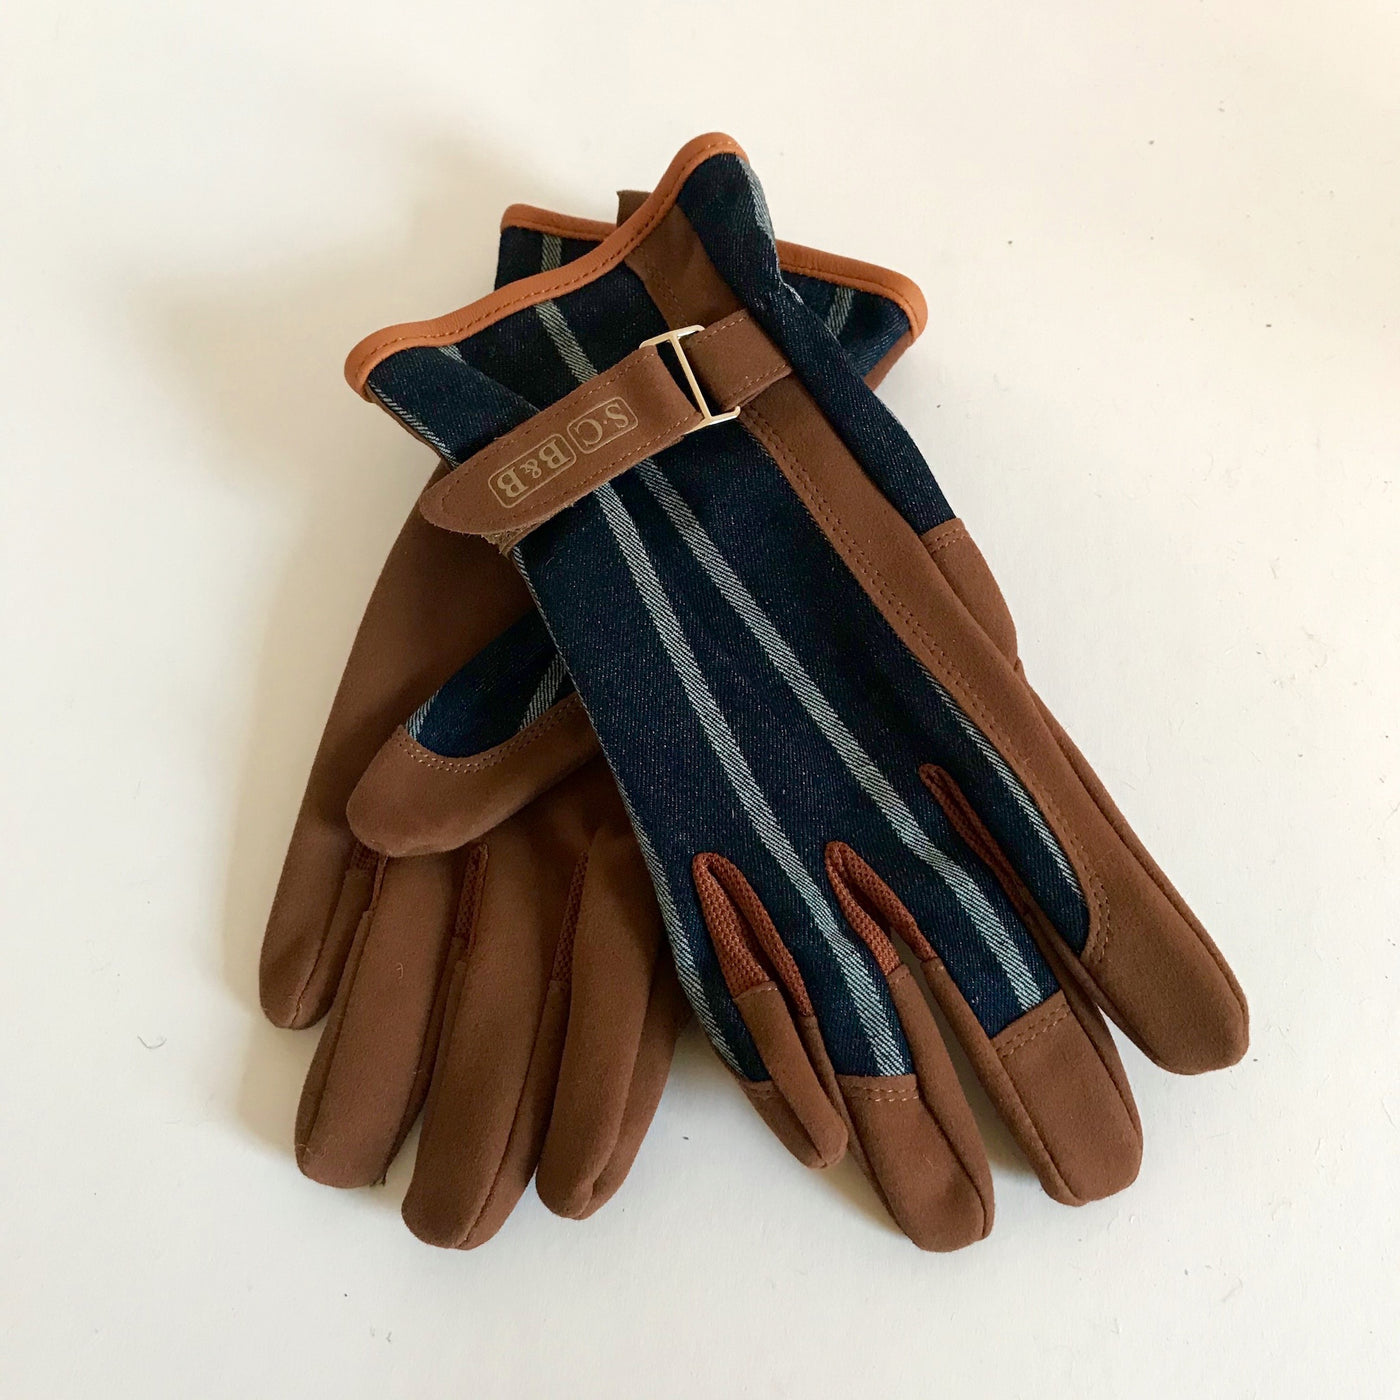 Rory & Ruby Sophie Conran one size gardener's gloves with blue ticking fronts, tan  ultra-soft faux leather and adjustable wrist straps.